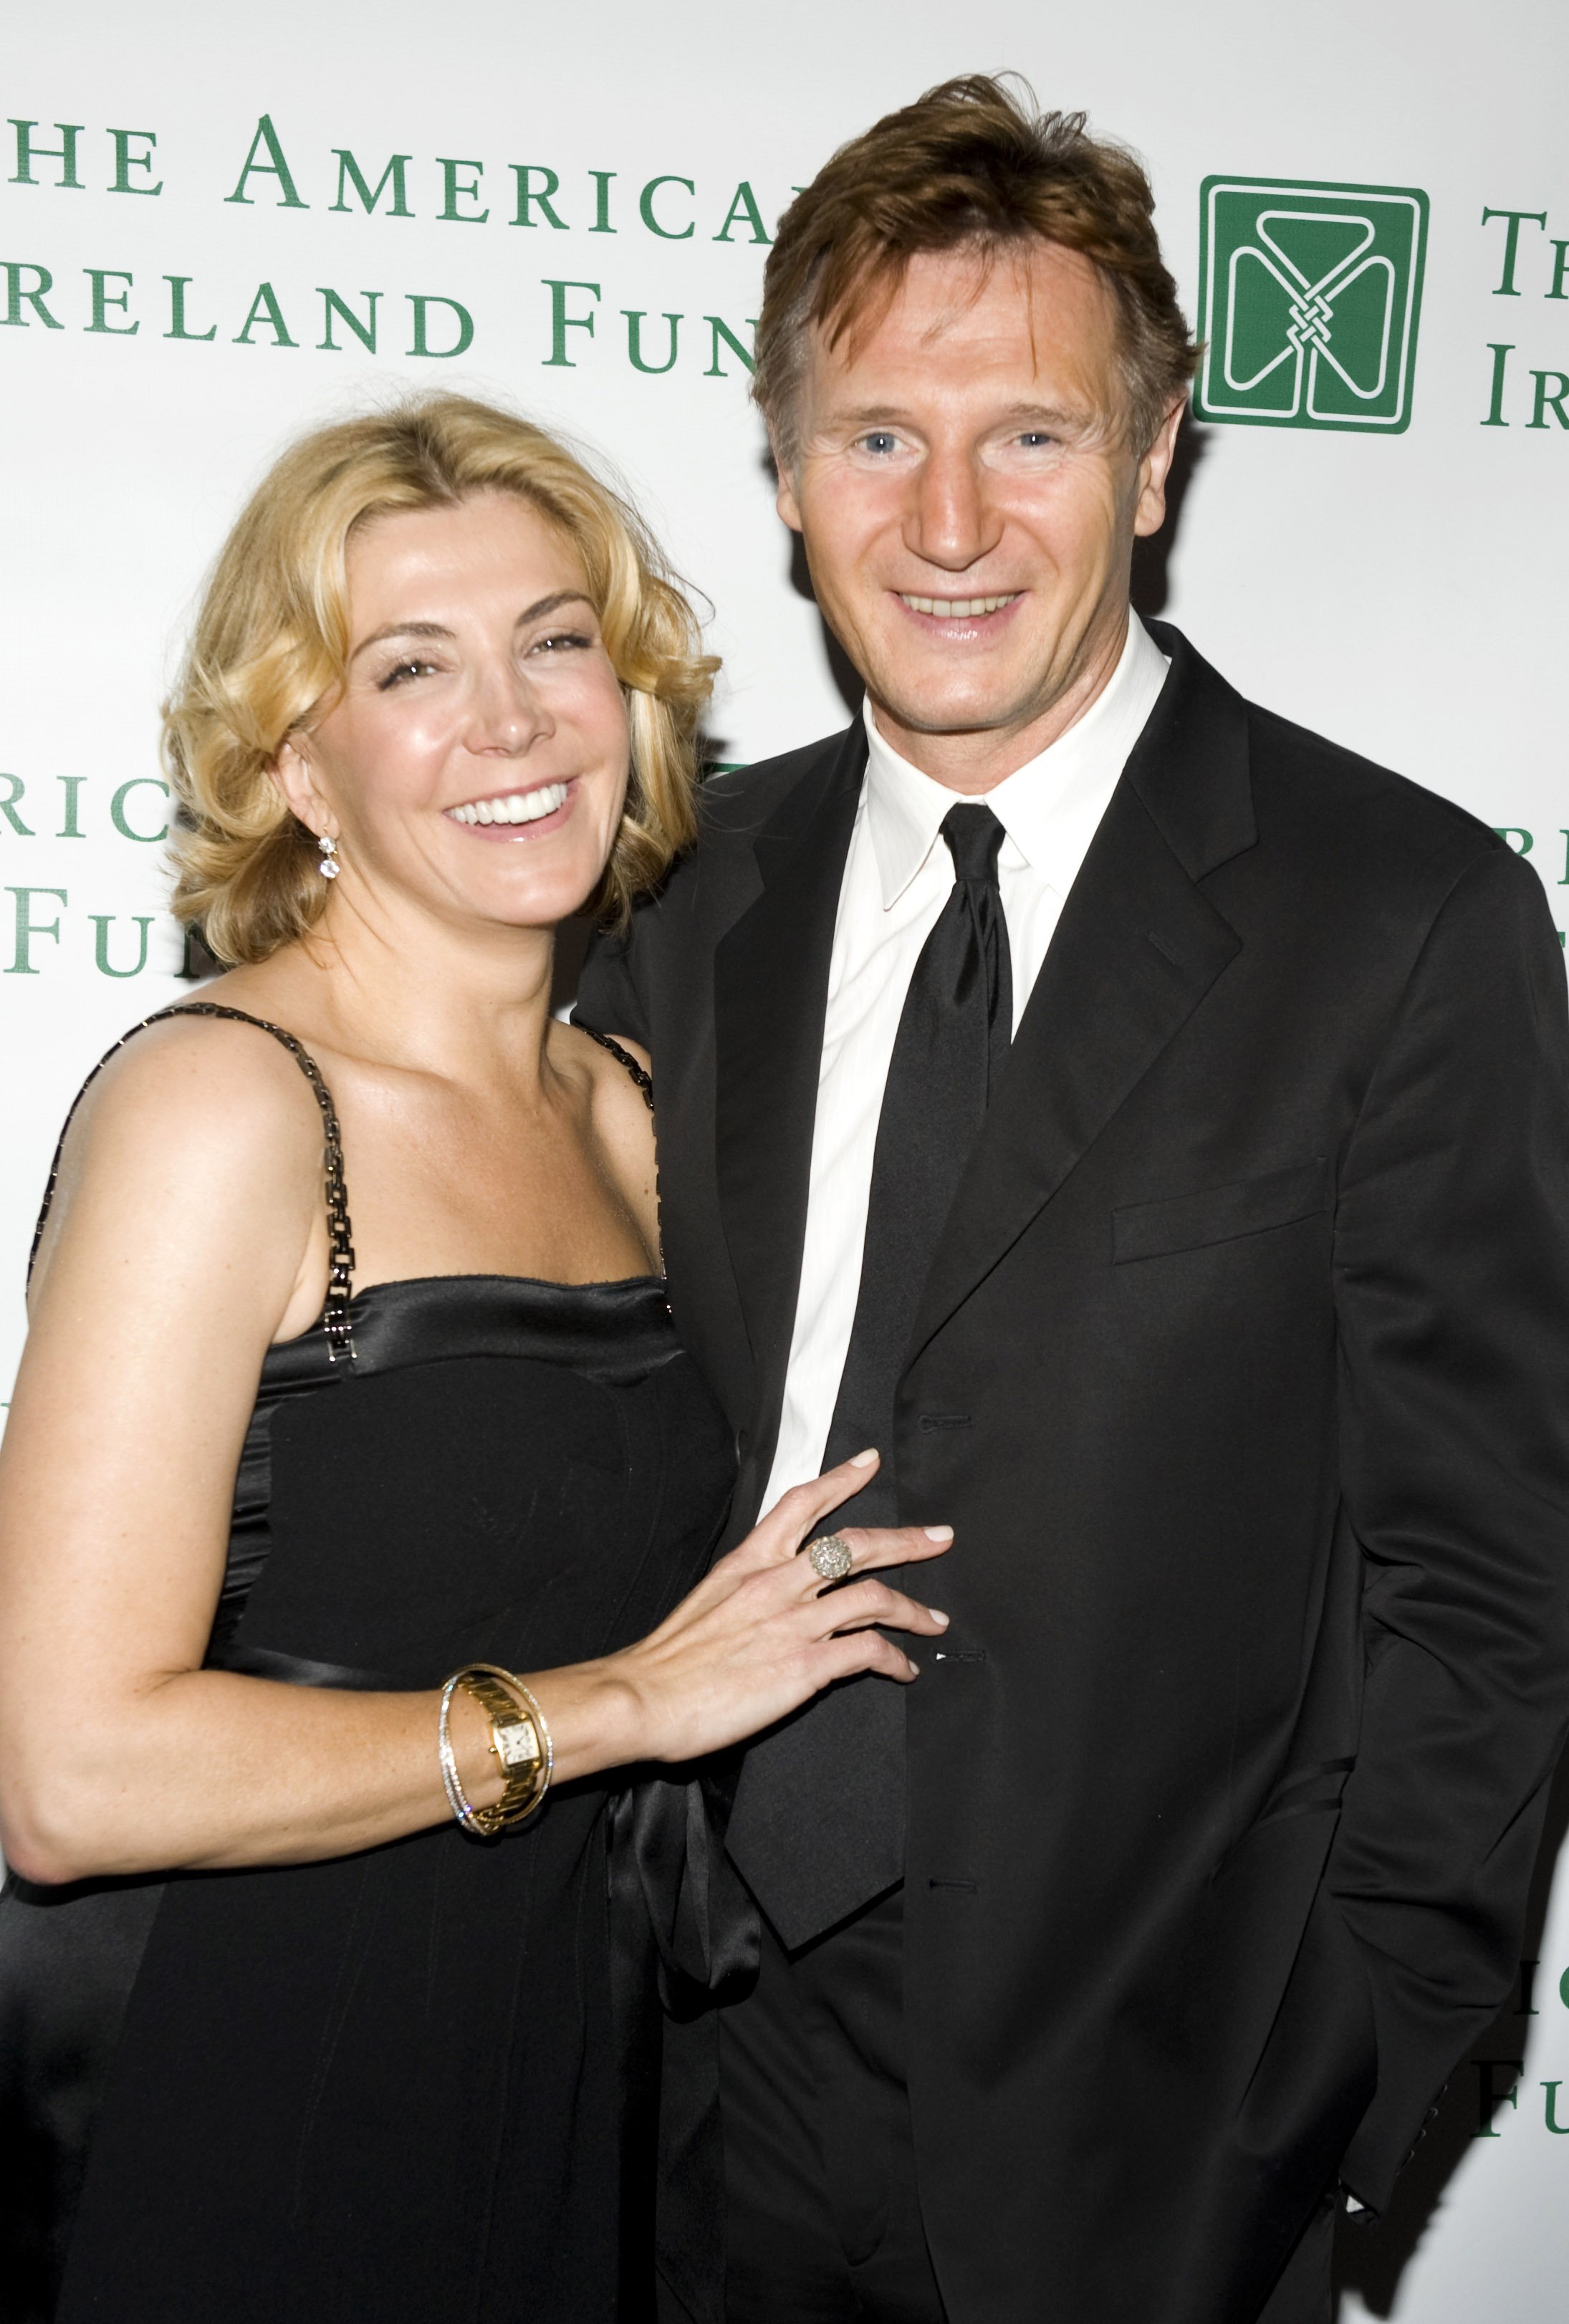 Liam Neeson with wife Natasha Richardson attending the 33rd Annual American Ireland Fund Gala at The Tent at Lincoln Center on May 08, 2008 in New York City. | Source: Getty Images